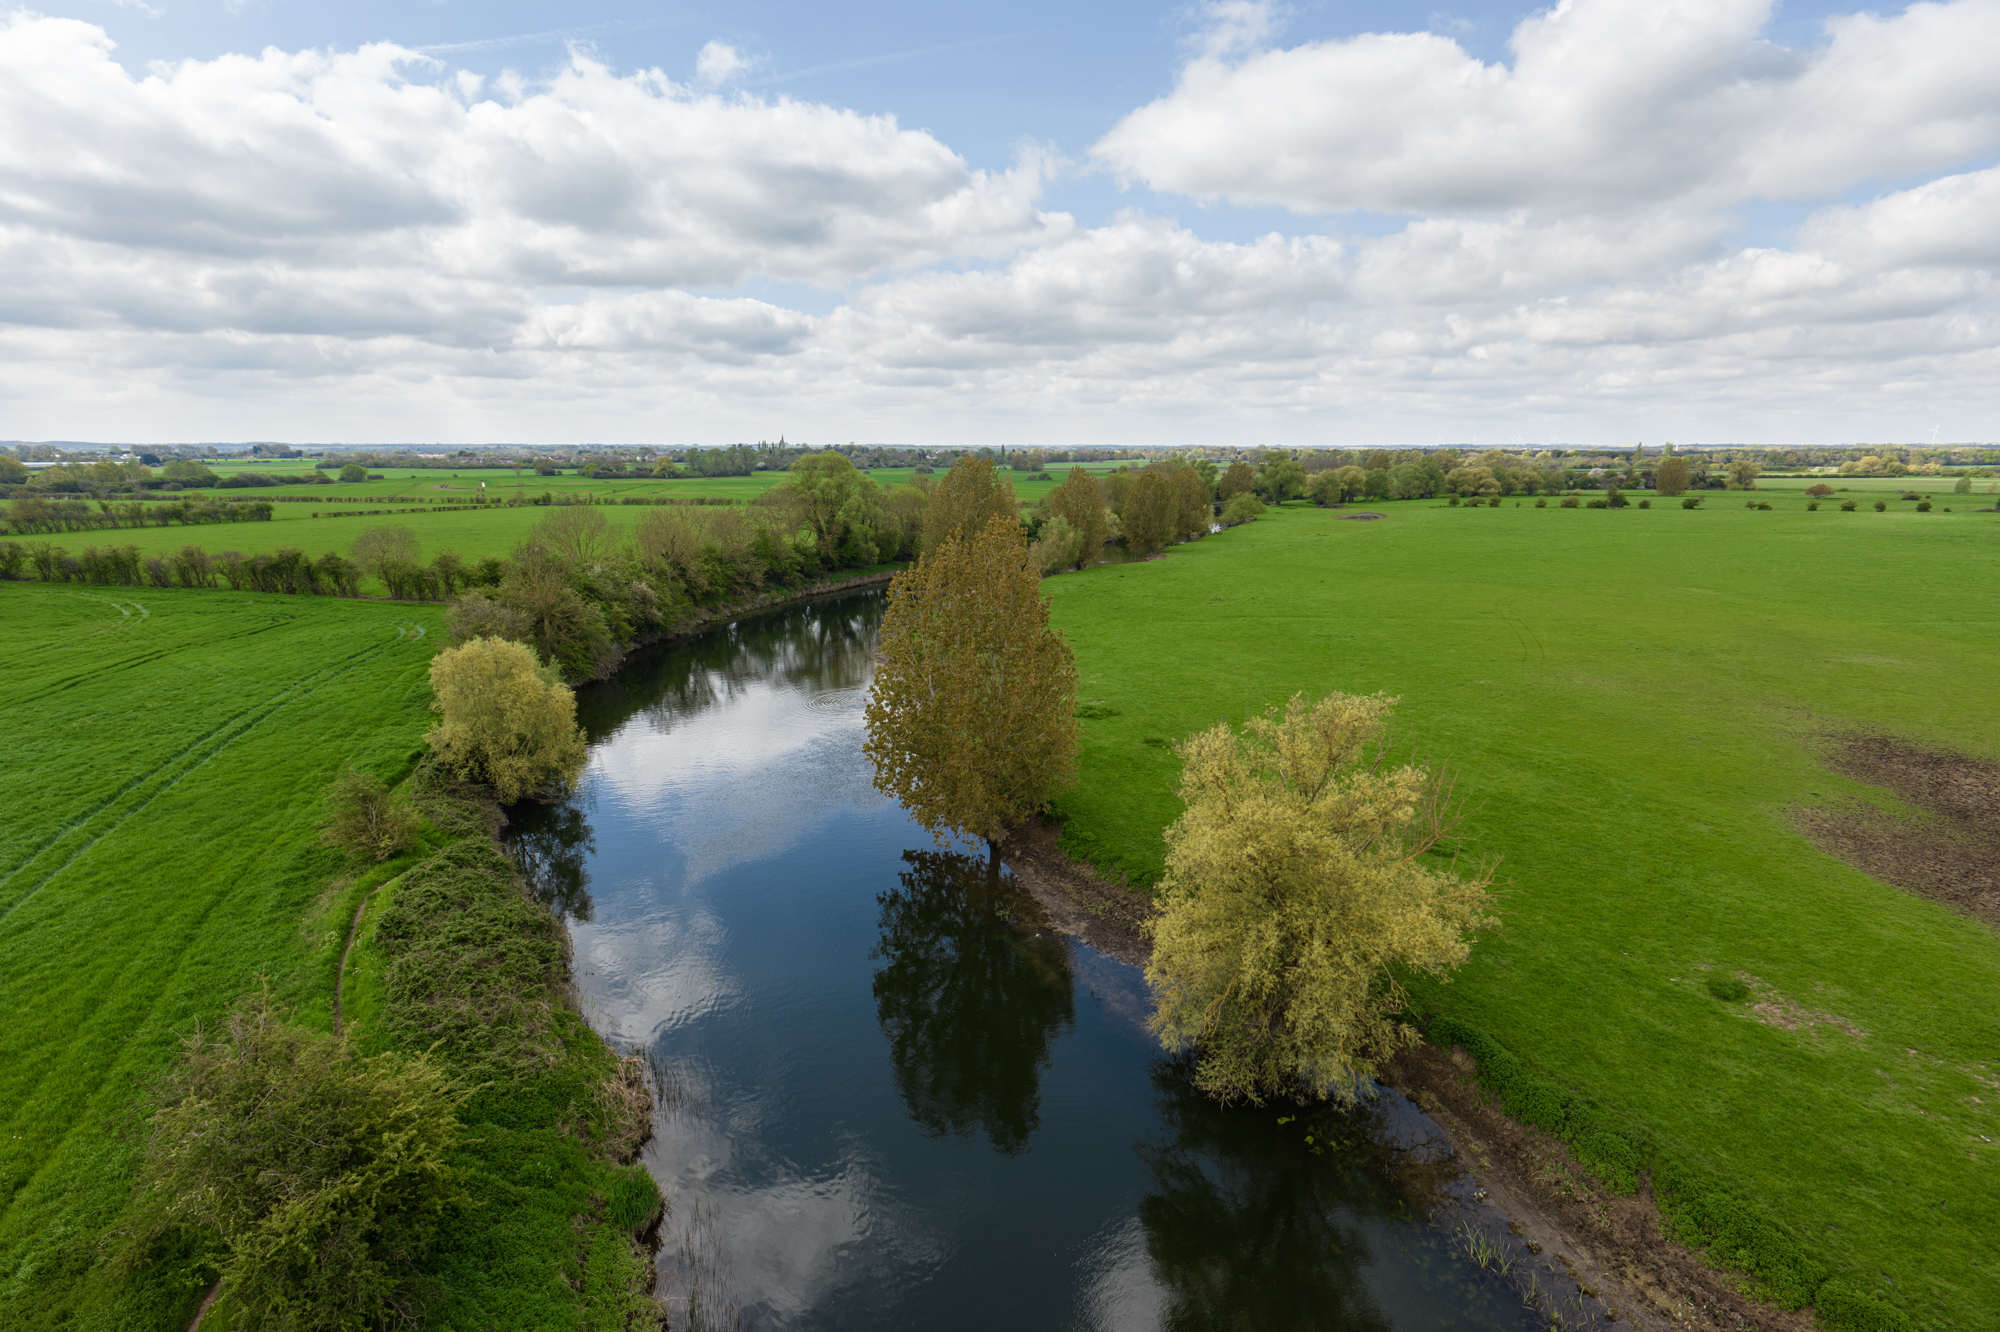 DJI Inspire 3 aerial image of river and green landscape